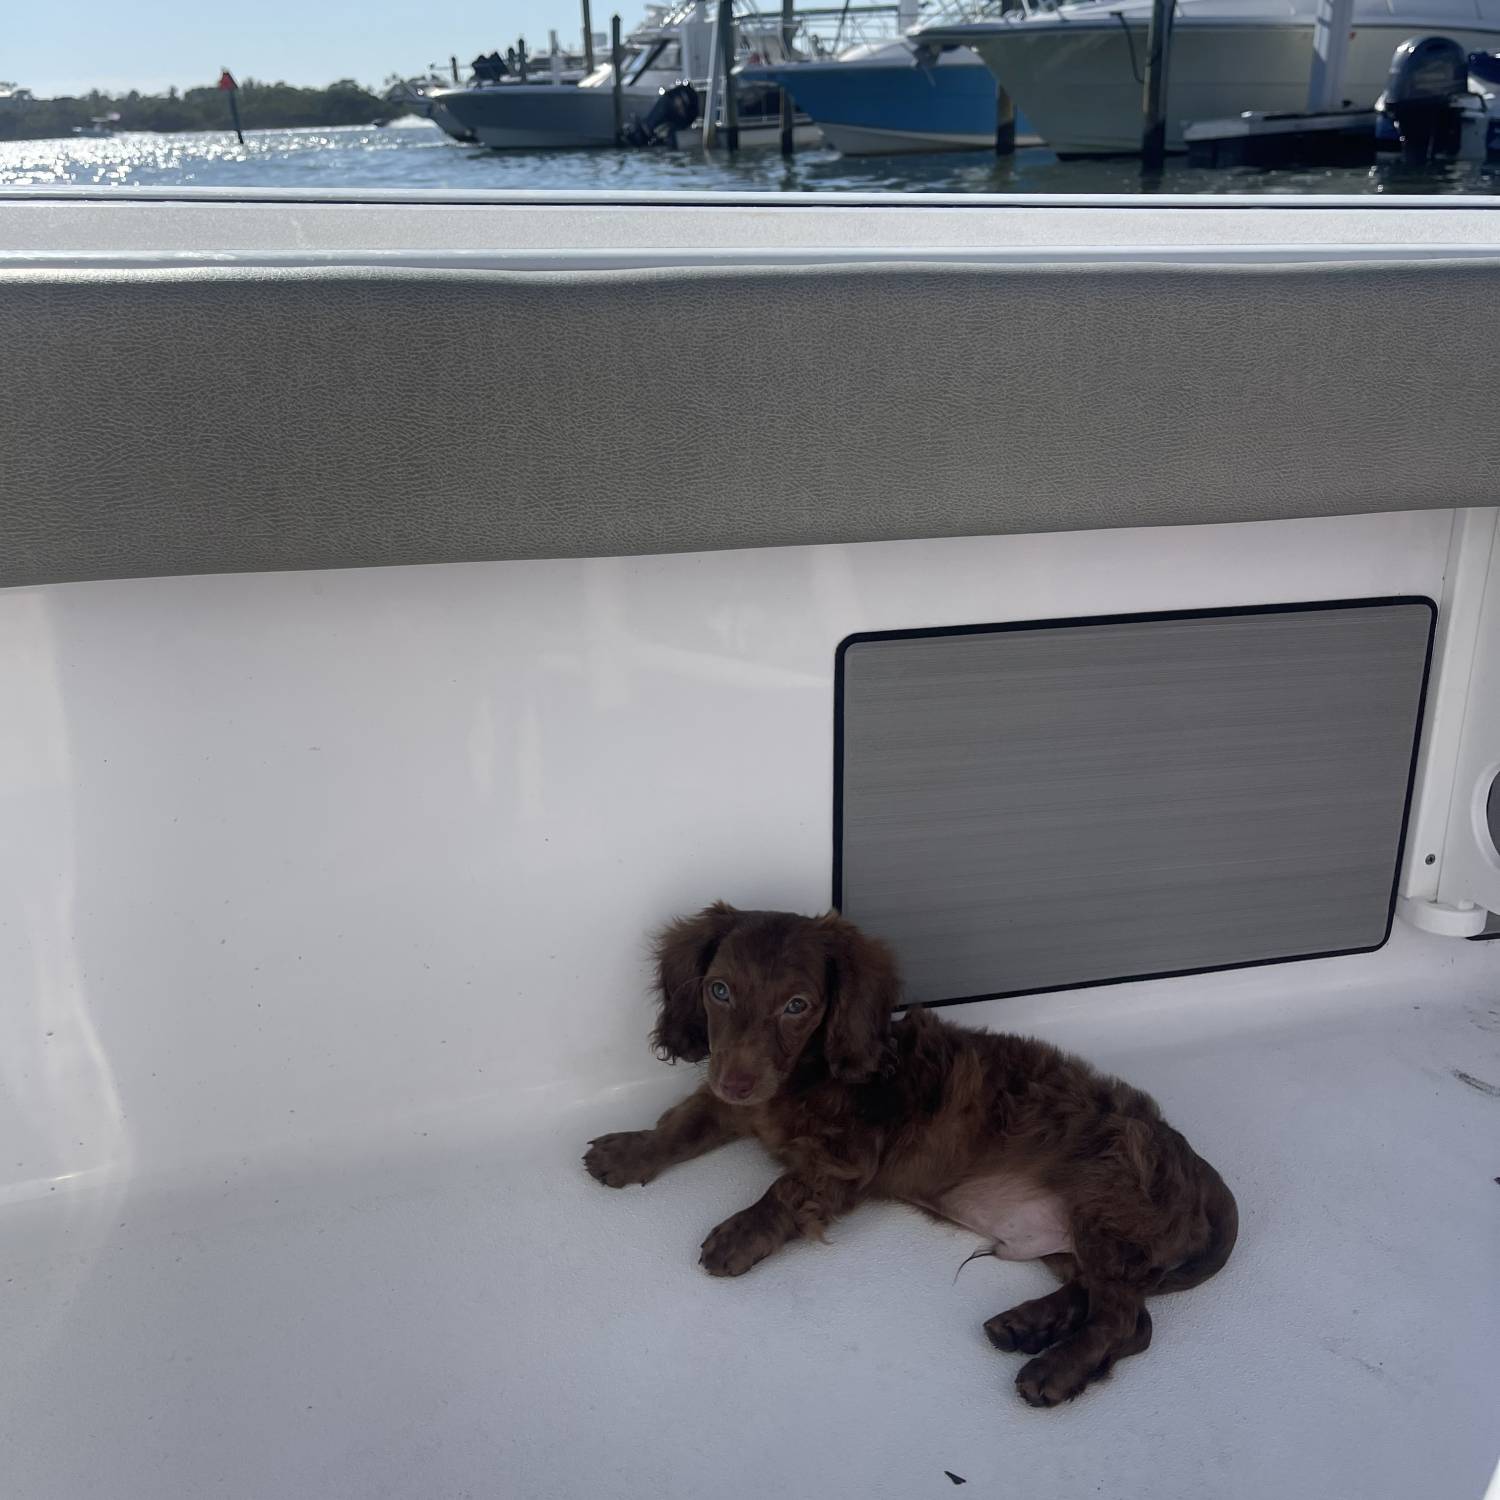 Sargent is my newest 4 month old dachshund puppy, this was his first time out on the boat.